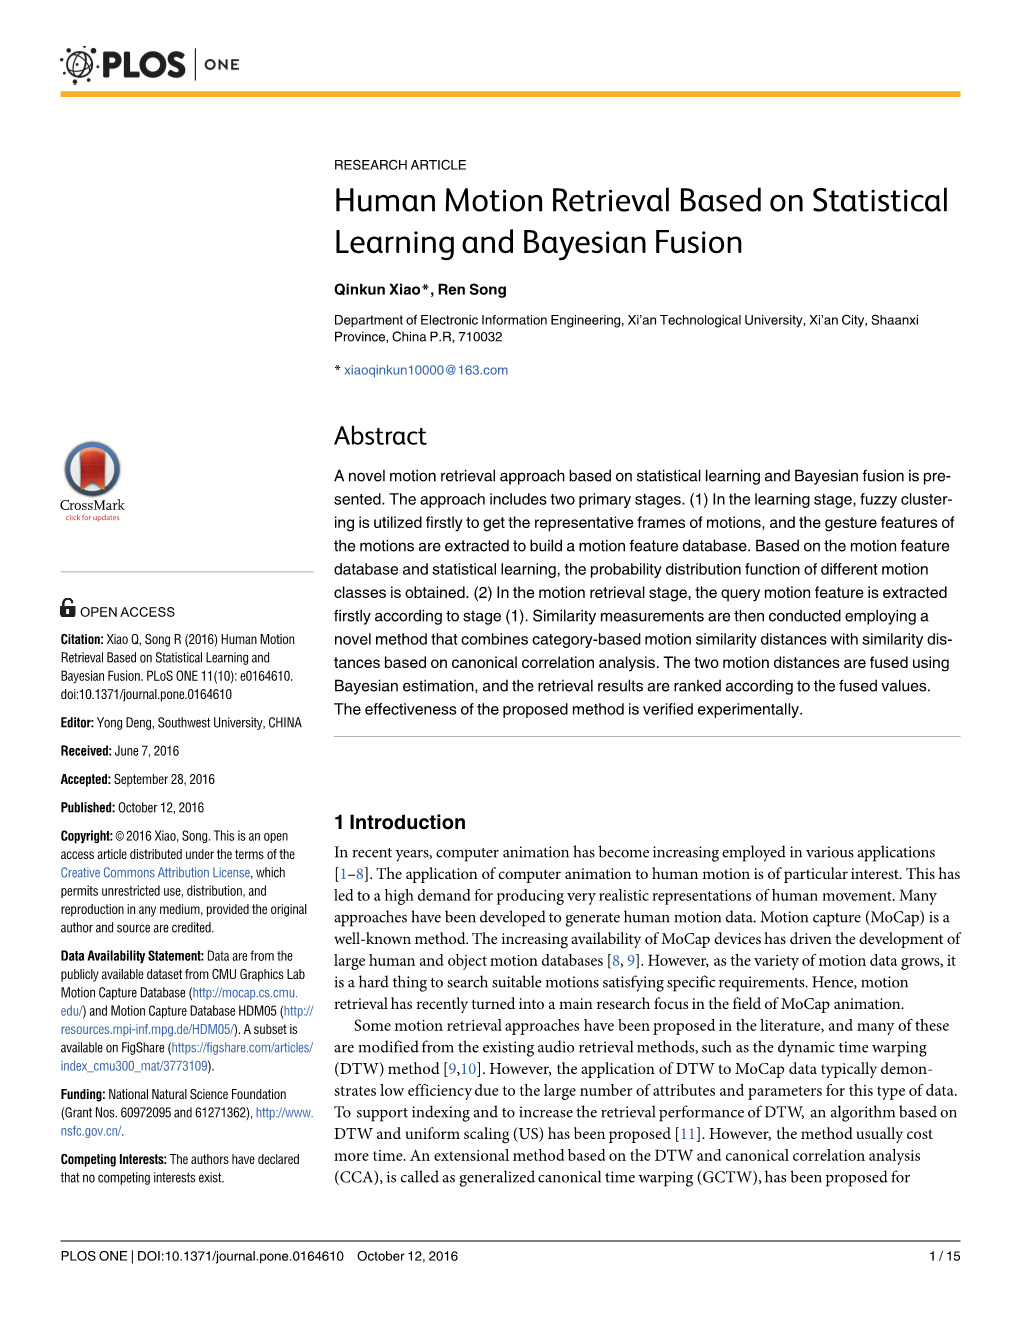 Human Motion Retrieval Based on Statistical Learning and Bayesian Fusion